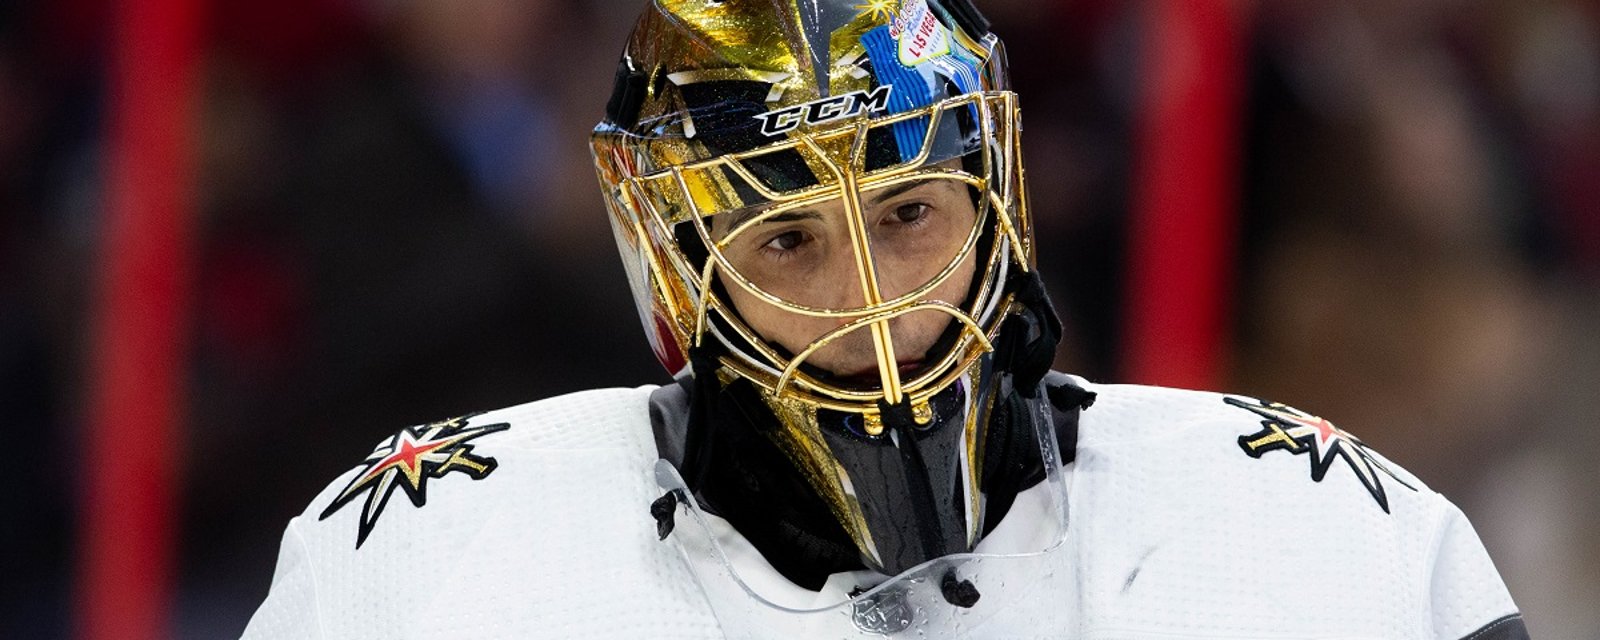 Marc Andre Fleury adds a special message from his dad to his helmet.